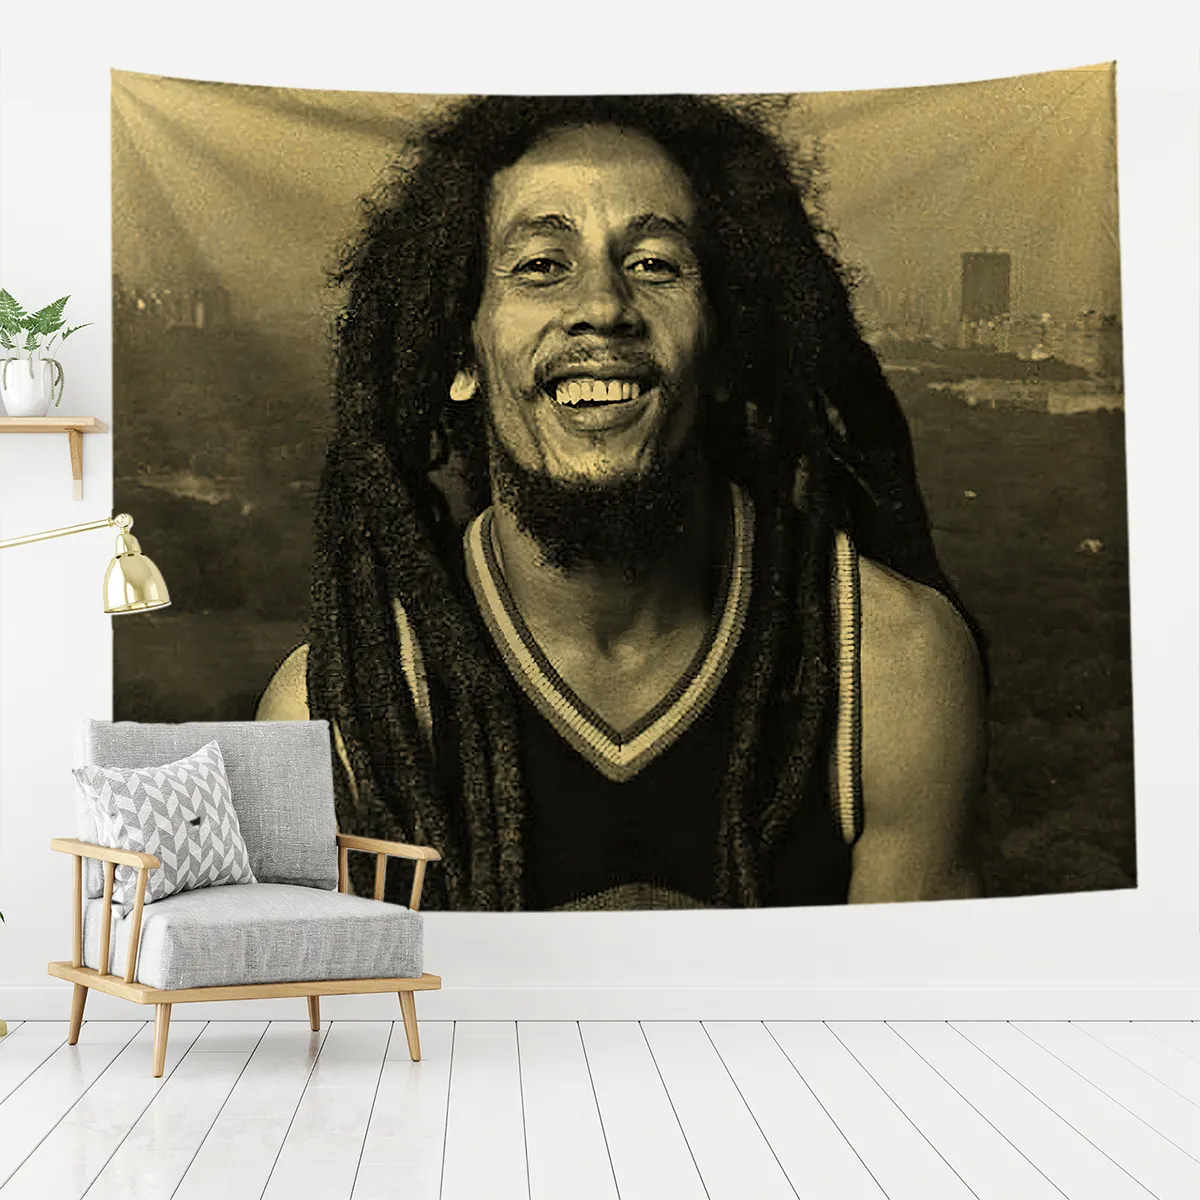 Wandbehang Hippie Indianer Bob Marley Tapisserie Home Decor Queen-Size-Tages decke Strand tuch 20 Styles